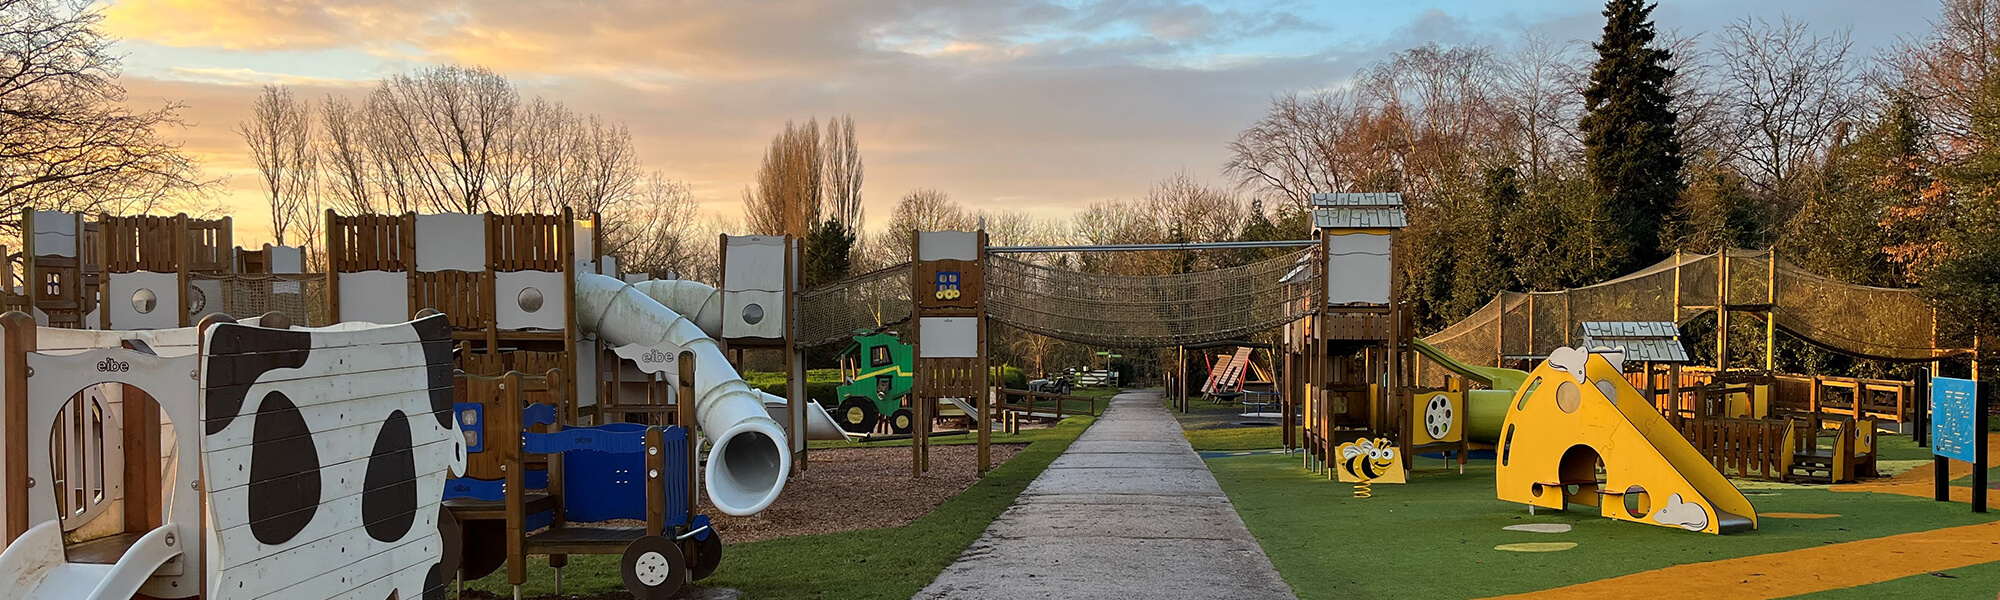 play park at sacrewell with slides, climbing frame, swing, sandpit, trampoline and more.